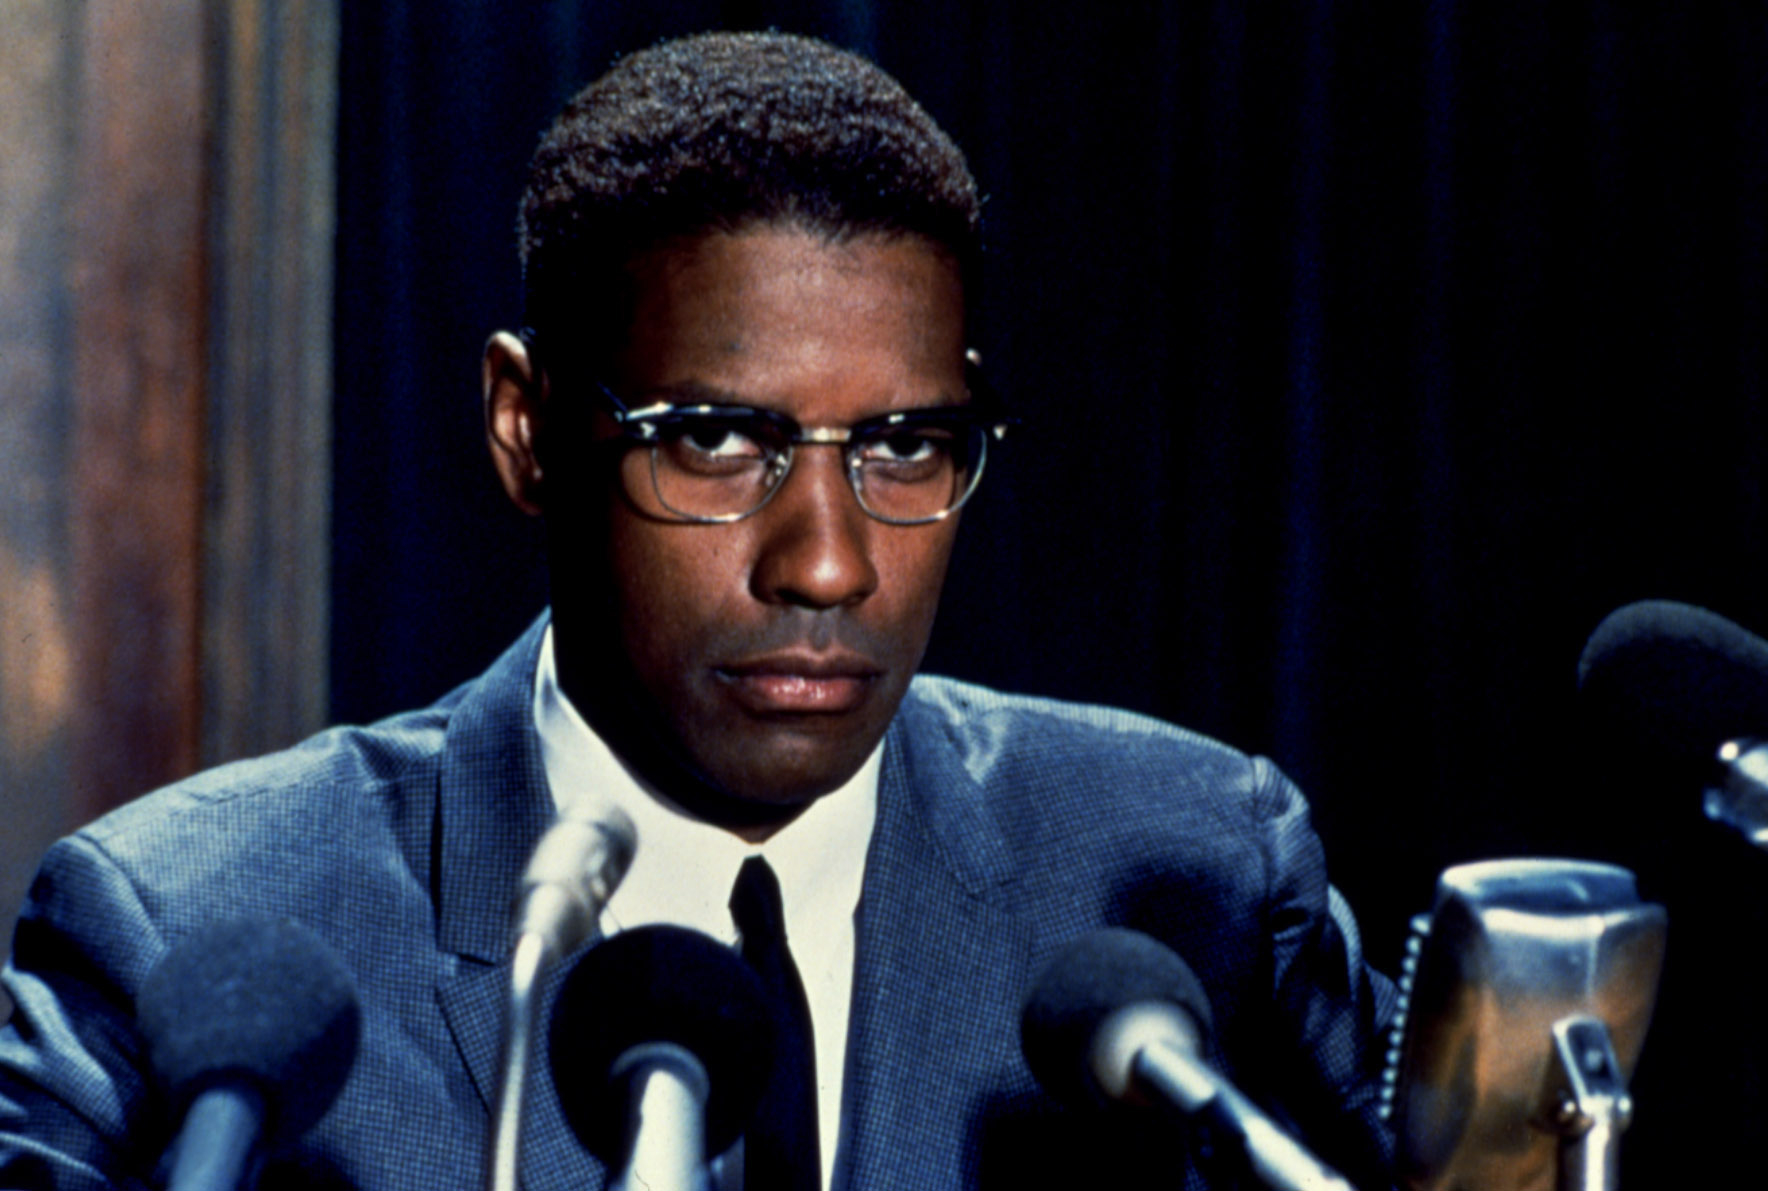 Actor Denzel Washington portraying Malcolm X in a suit at a podium in the film &quot;Malcolm X.&quot;